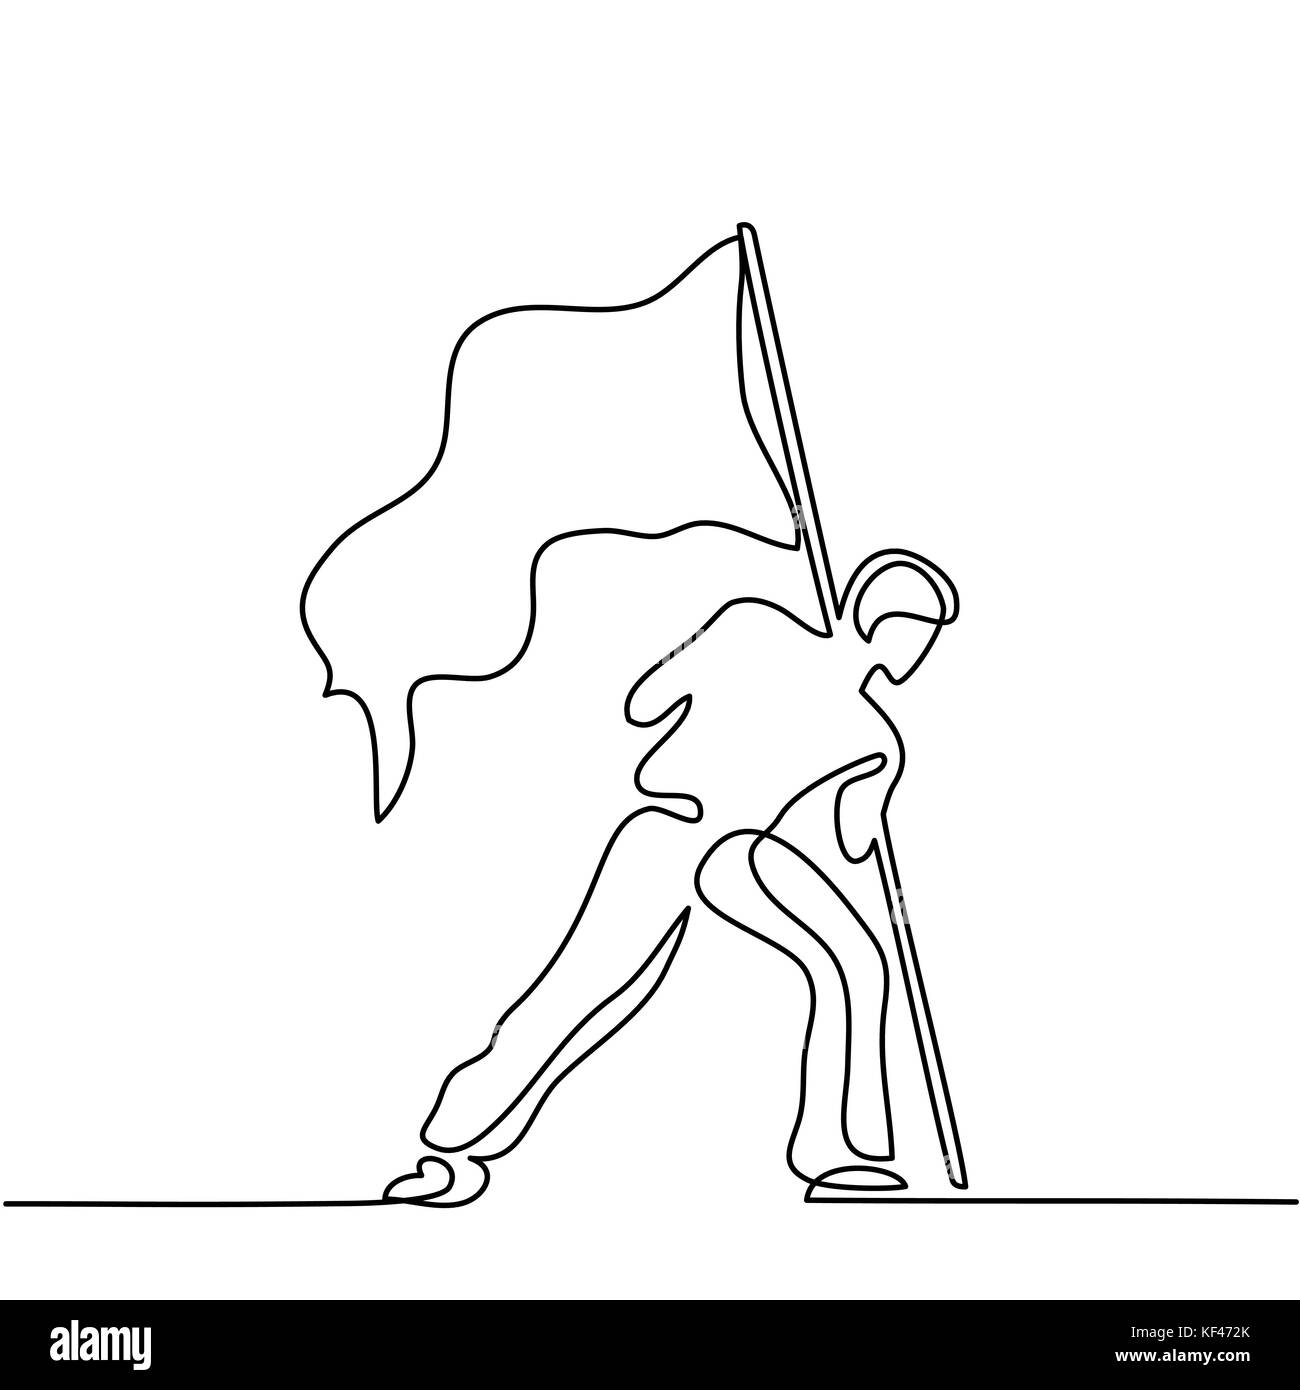 Man holding flag. Continuous line drawing Stock Vector